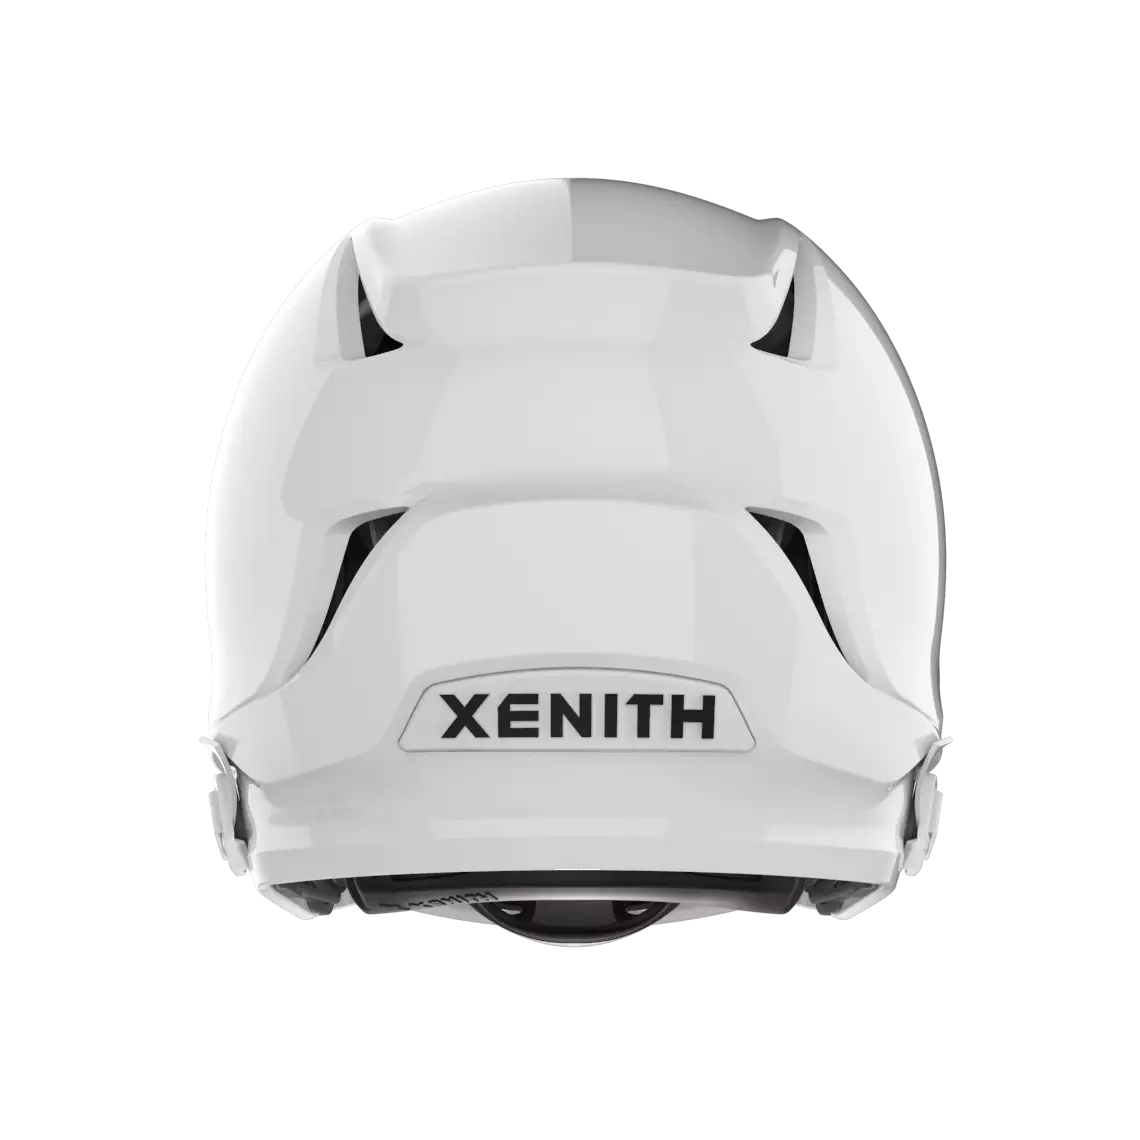 Backside view of Shadow XR white shell.